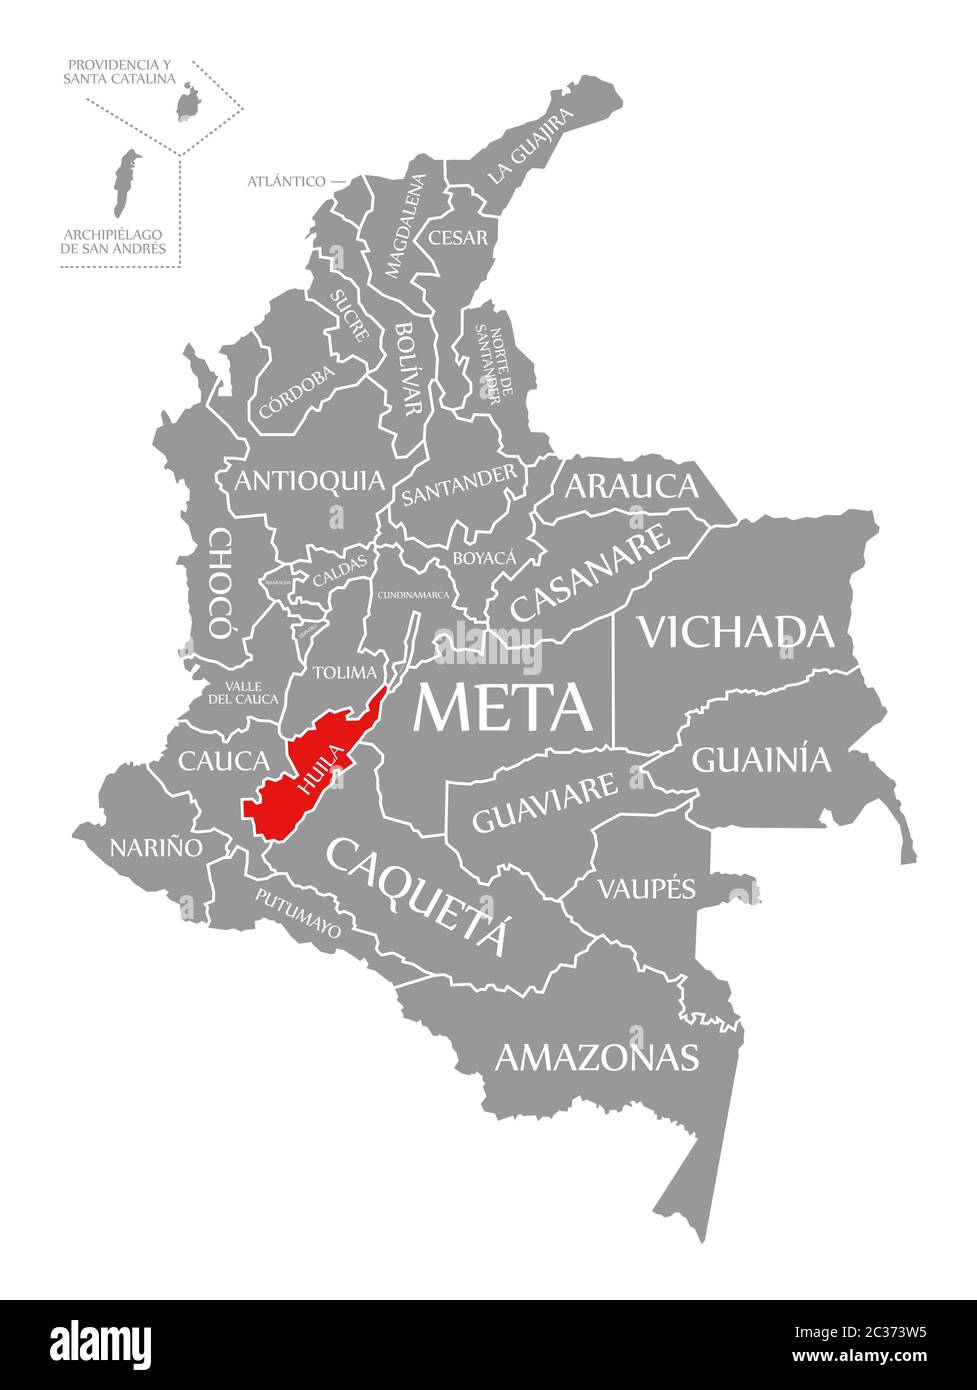 Huila red highlighted in map of Colombia Stock Photo